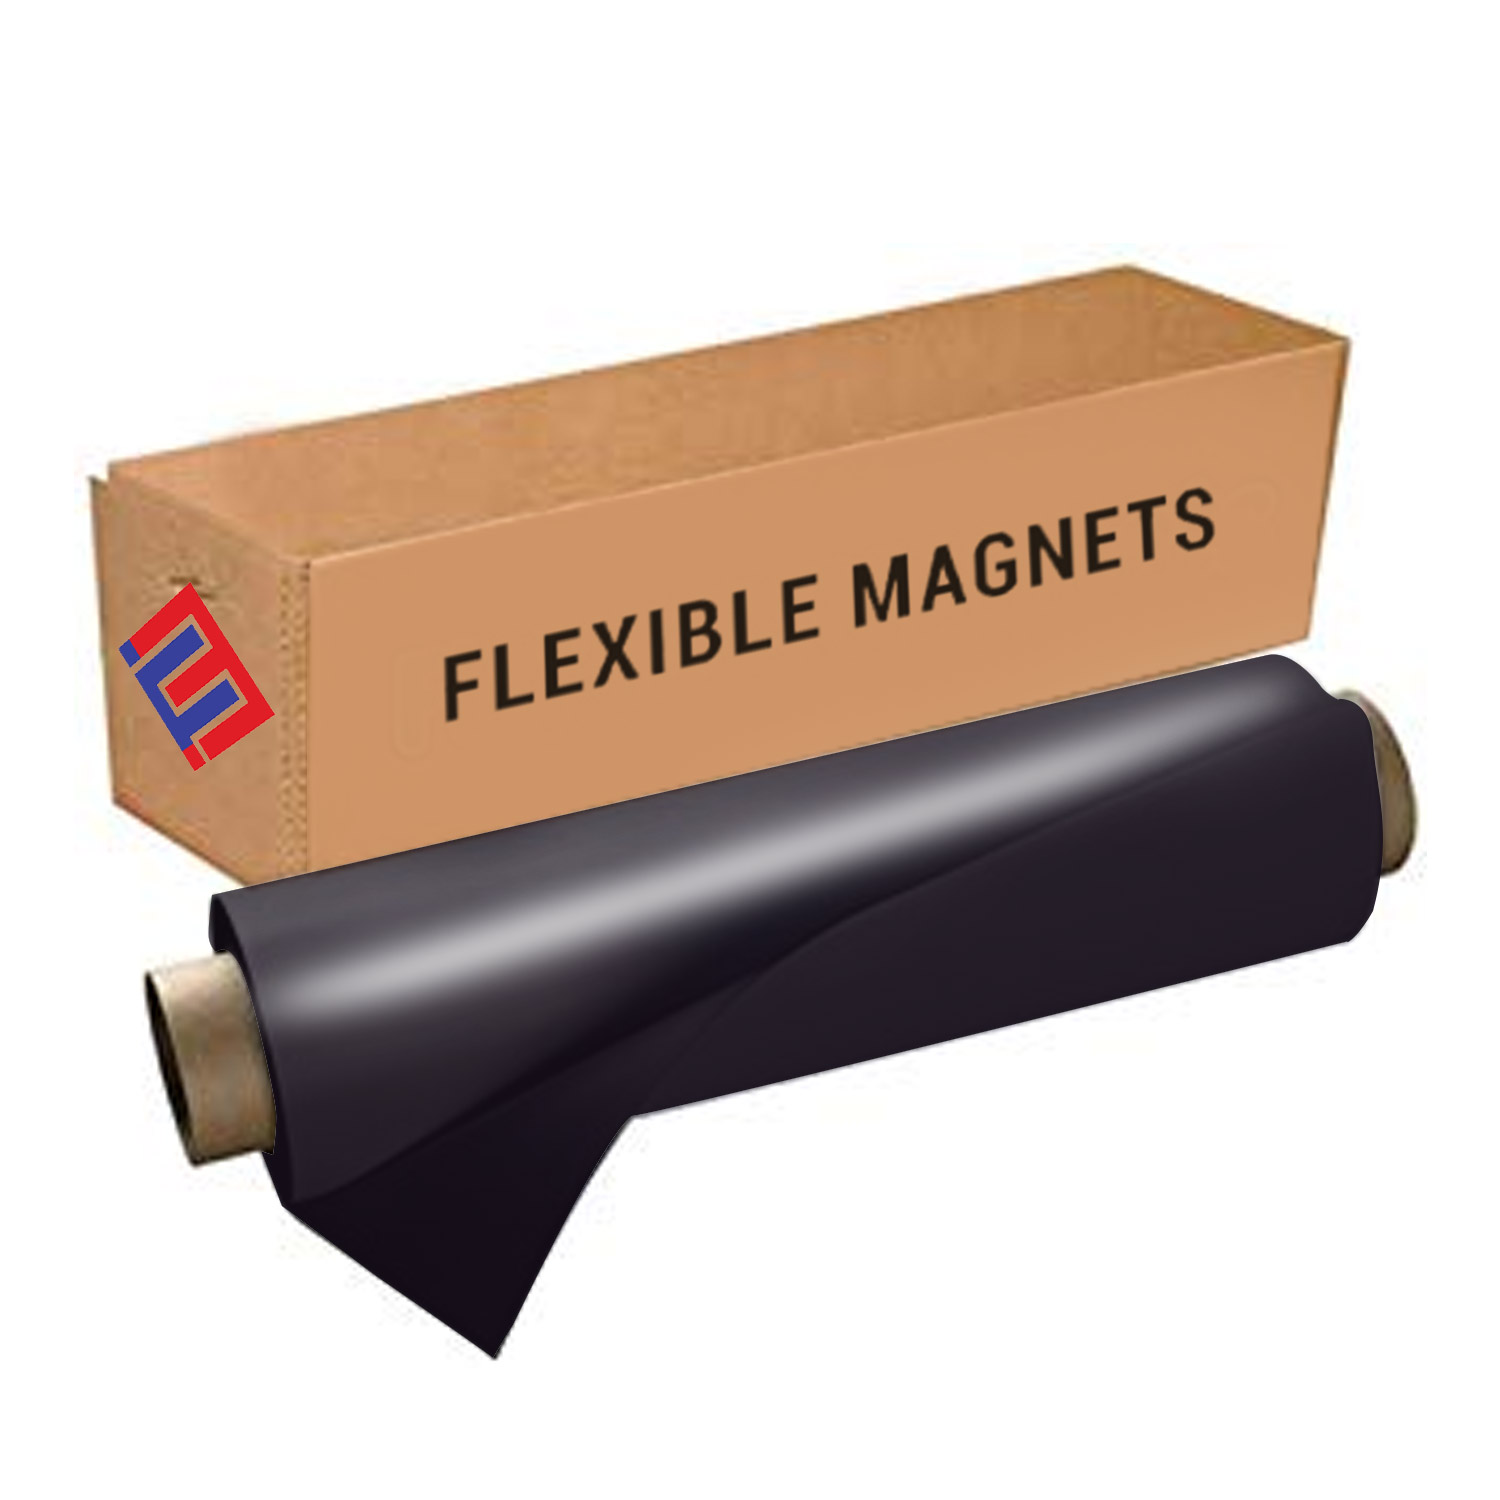 Magnetic Sheeting Roll- Black, Vinyl, Ideal for DIY Crafts, Classroom,  Vehicle, Business & Home. (2 ft x 25 ft)